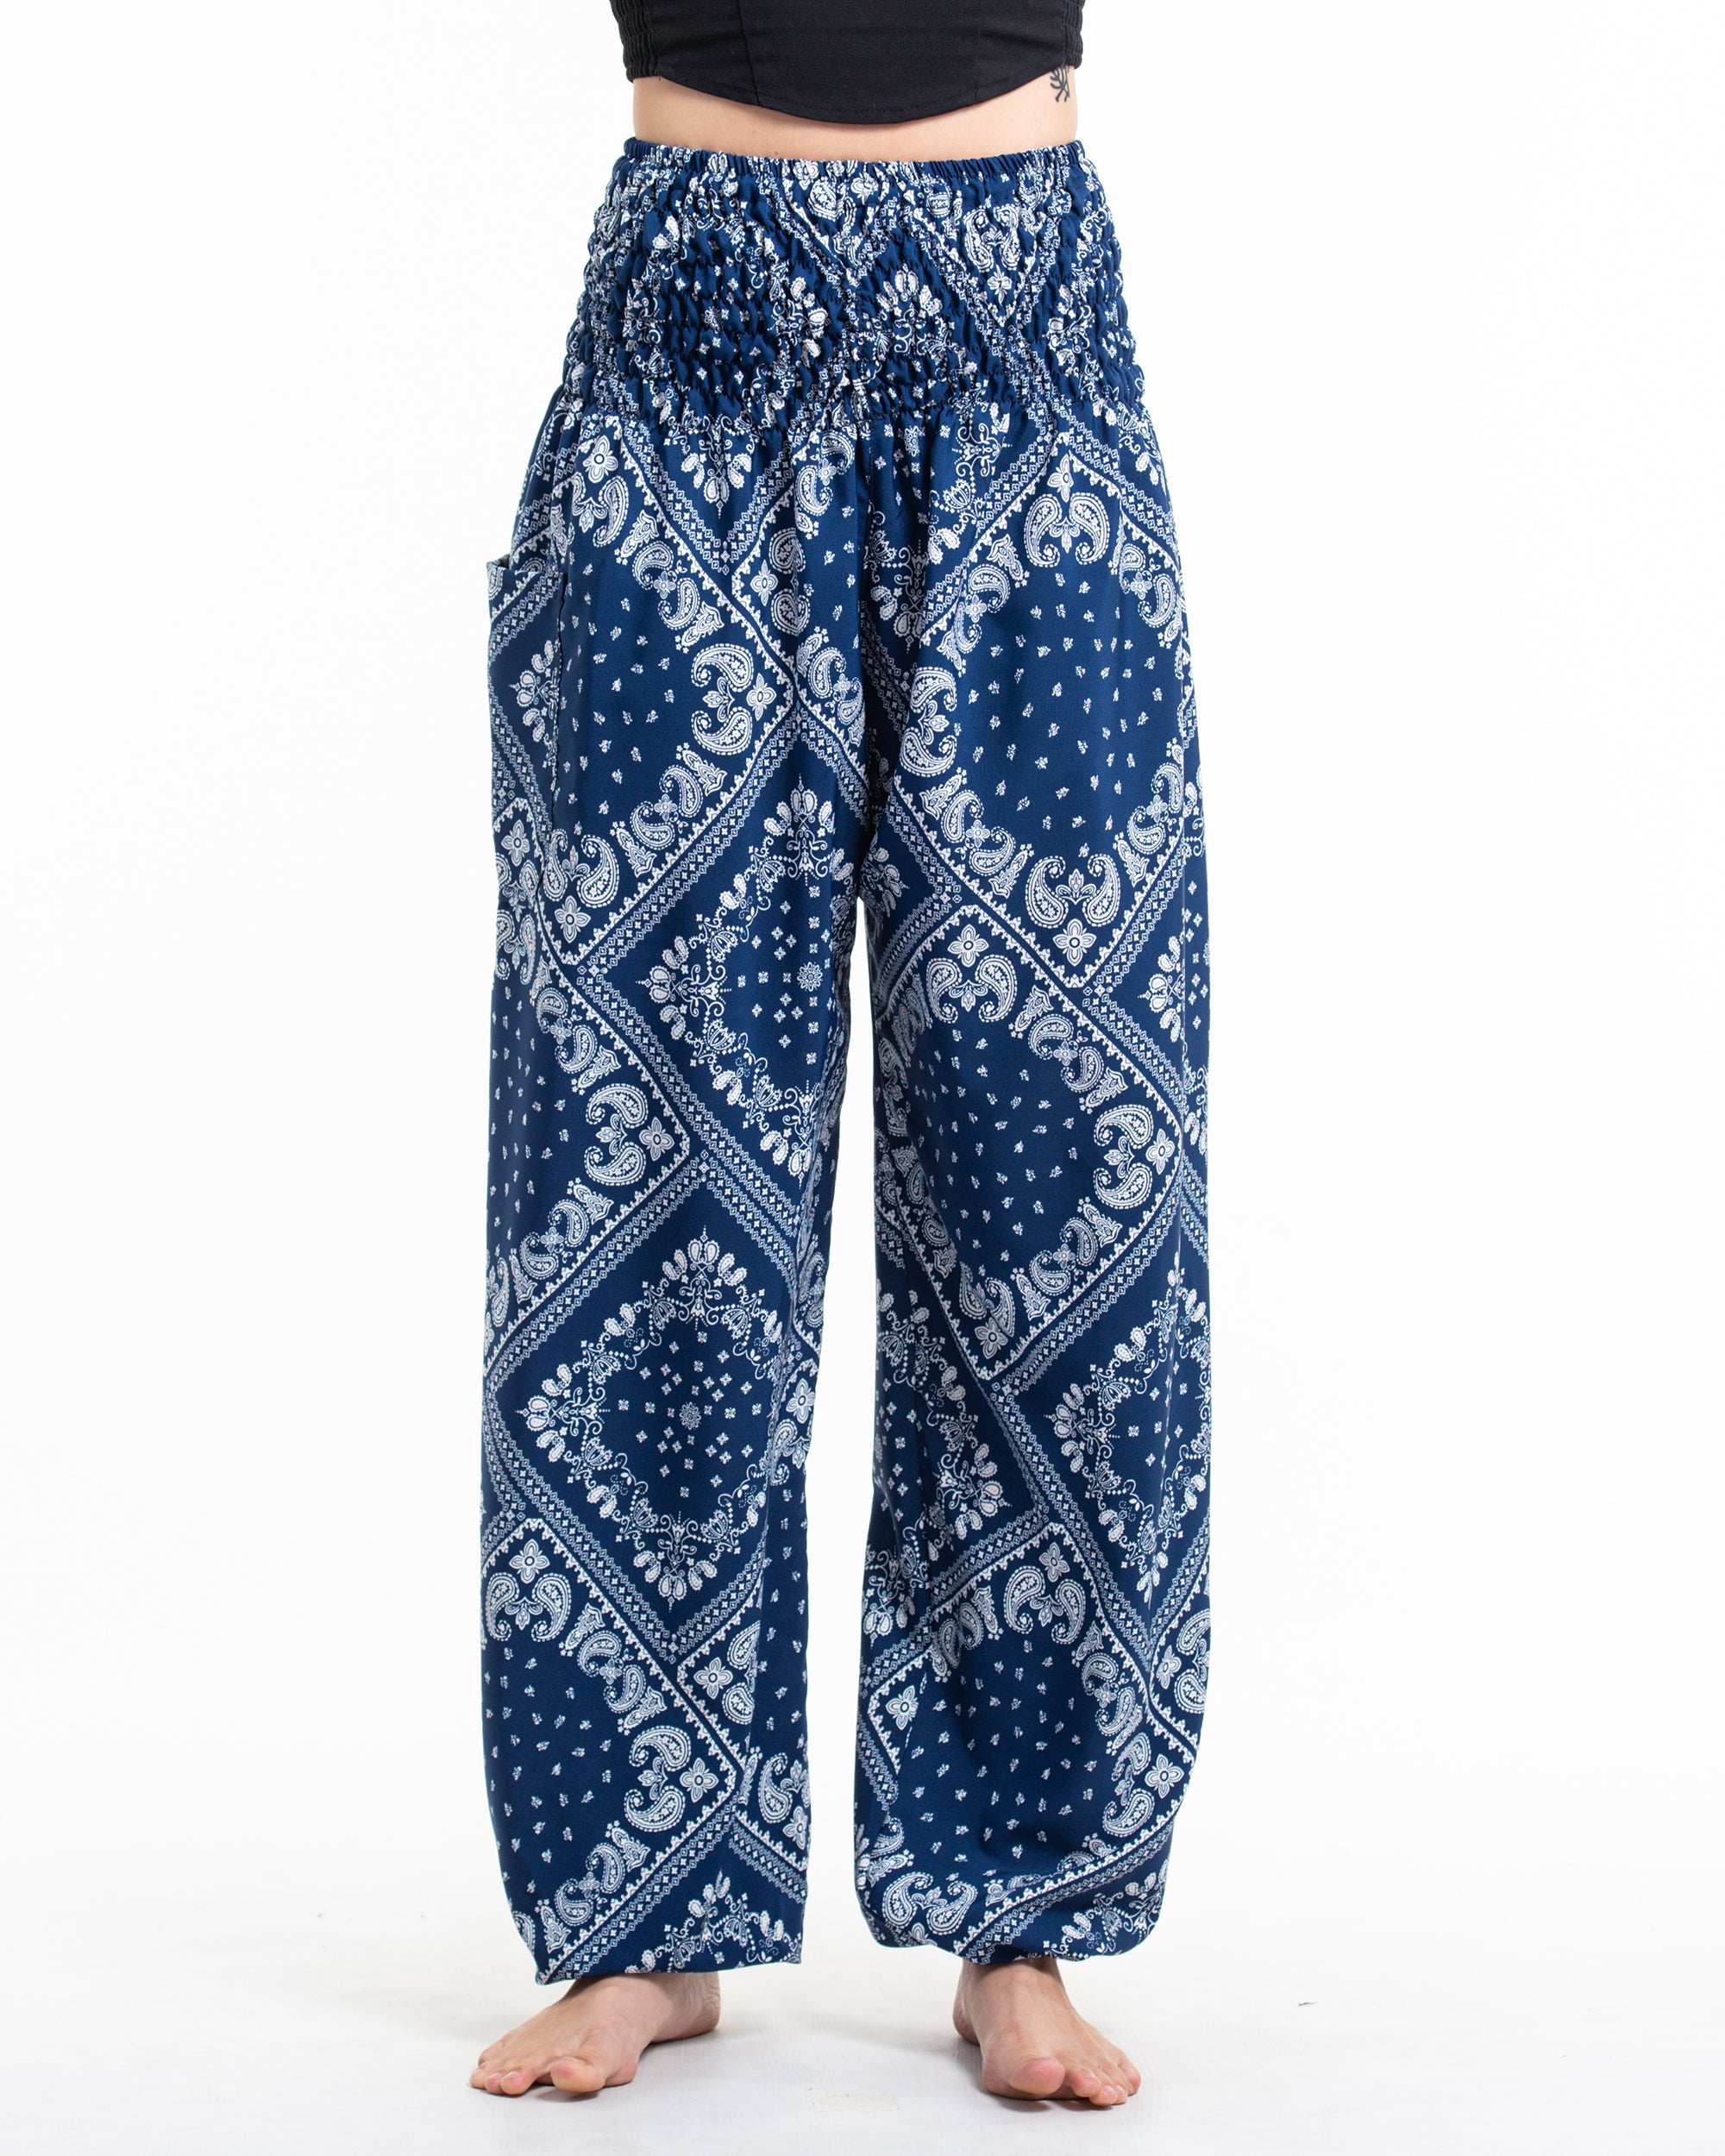 Your New Favorite Pants: The Elephant Pants